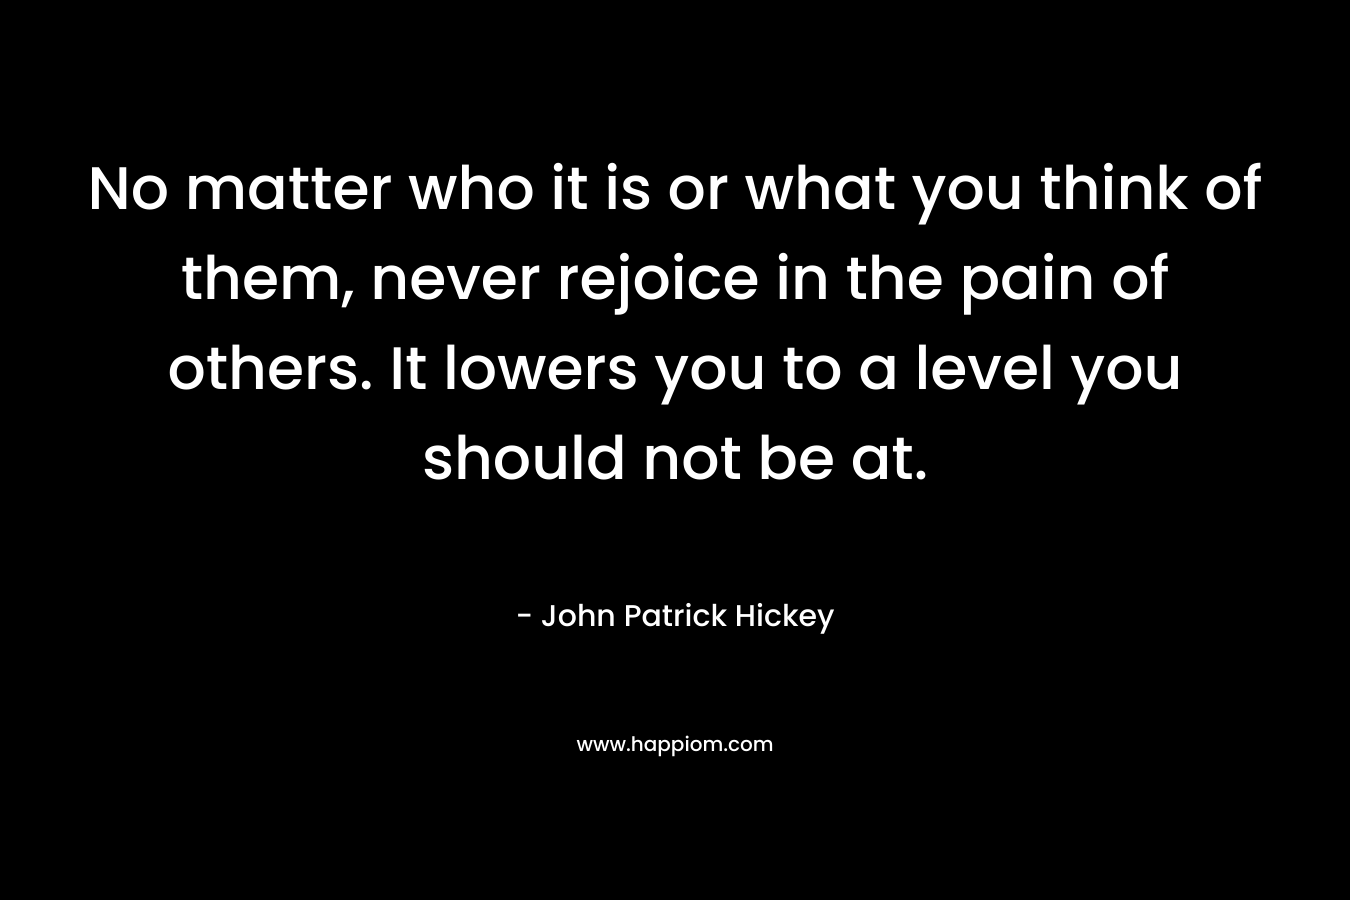 No matter who it is or what you think of them, never rejoice in the pain of others. It lowers you to a level you should not be at.